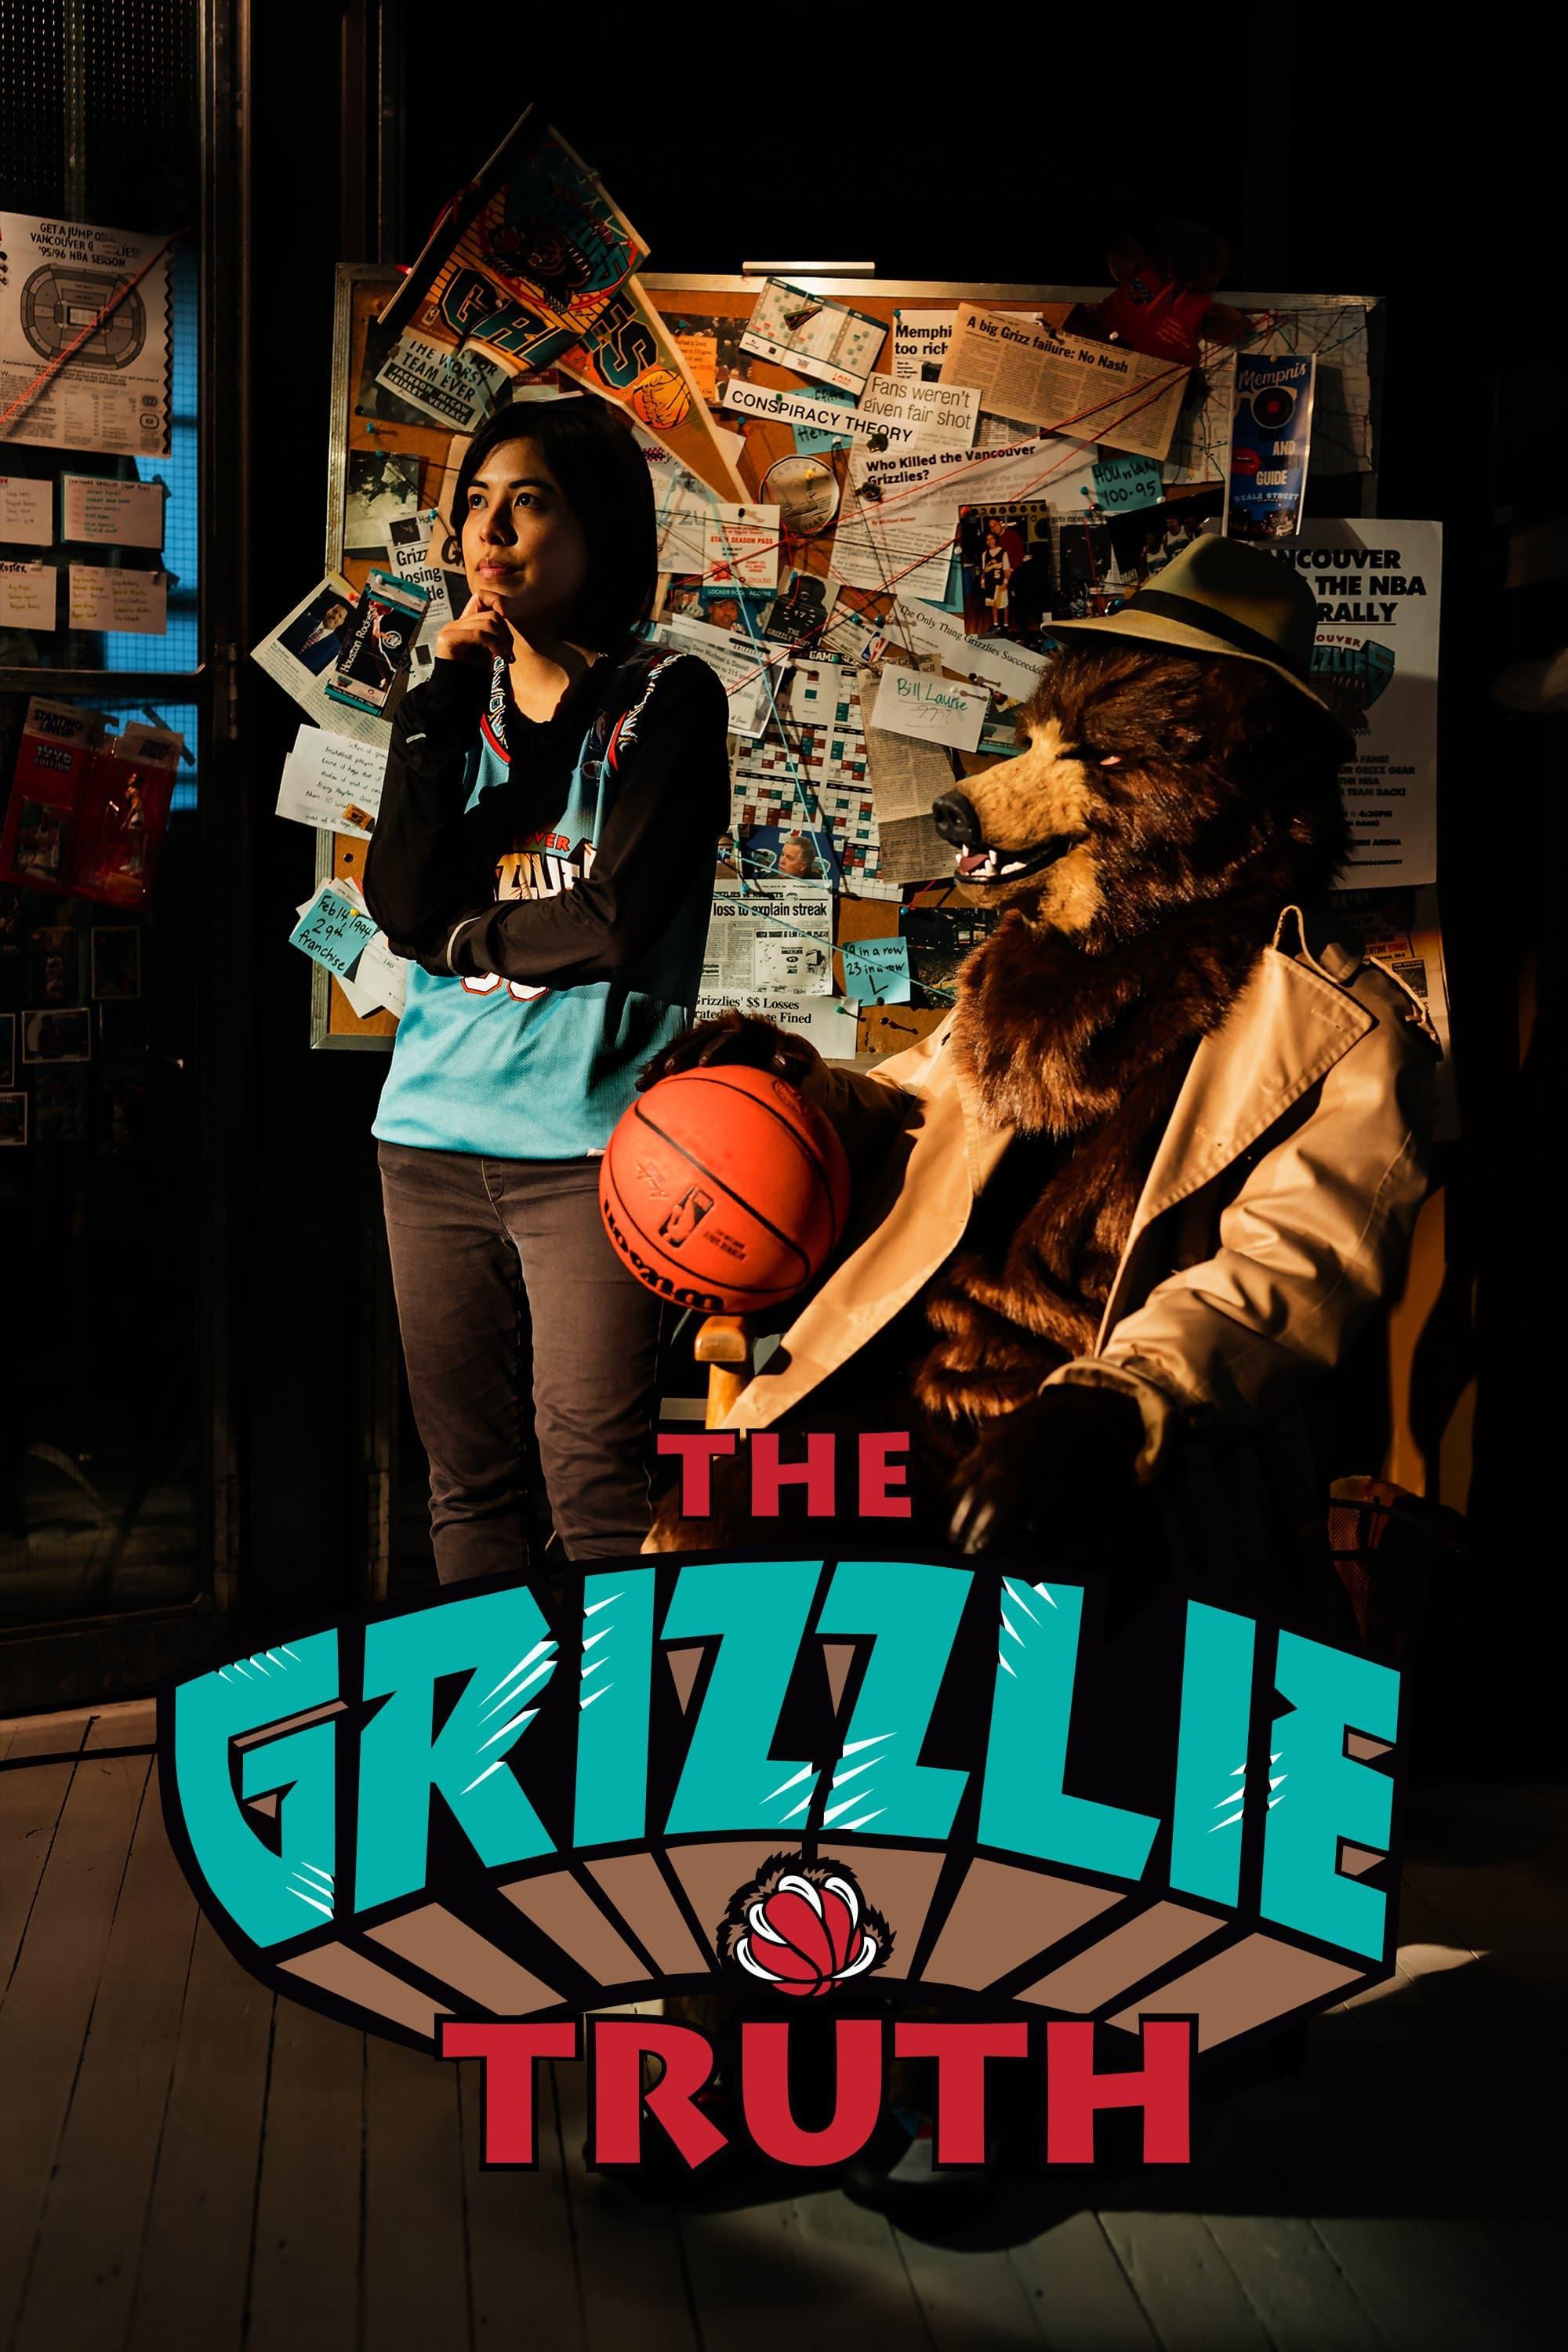 The Grizzlie Truth poster